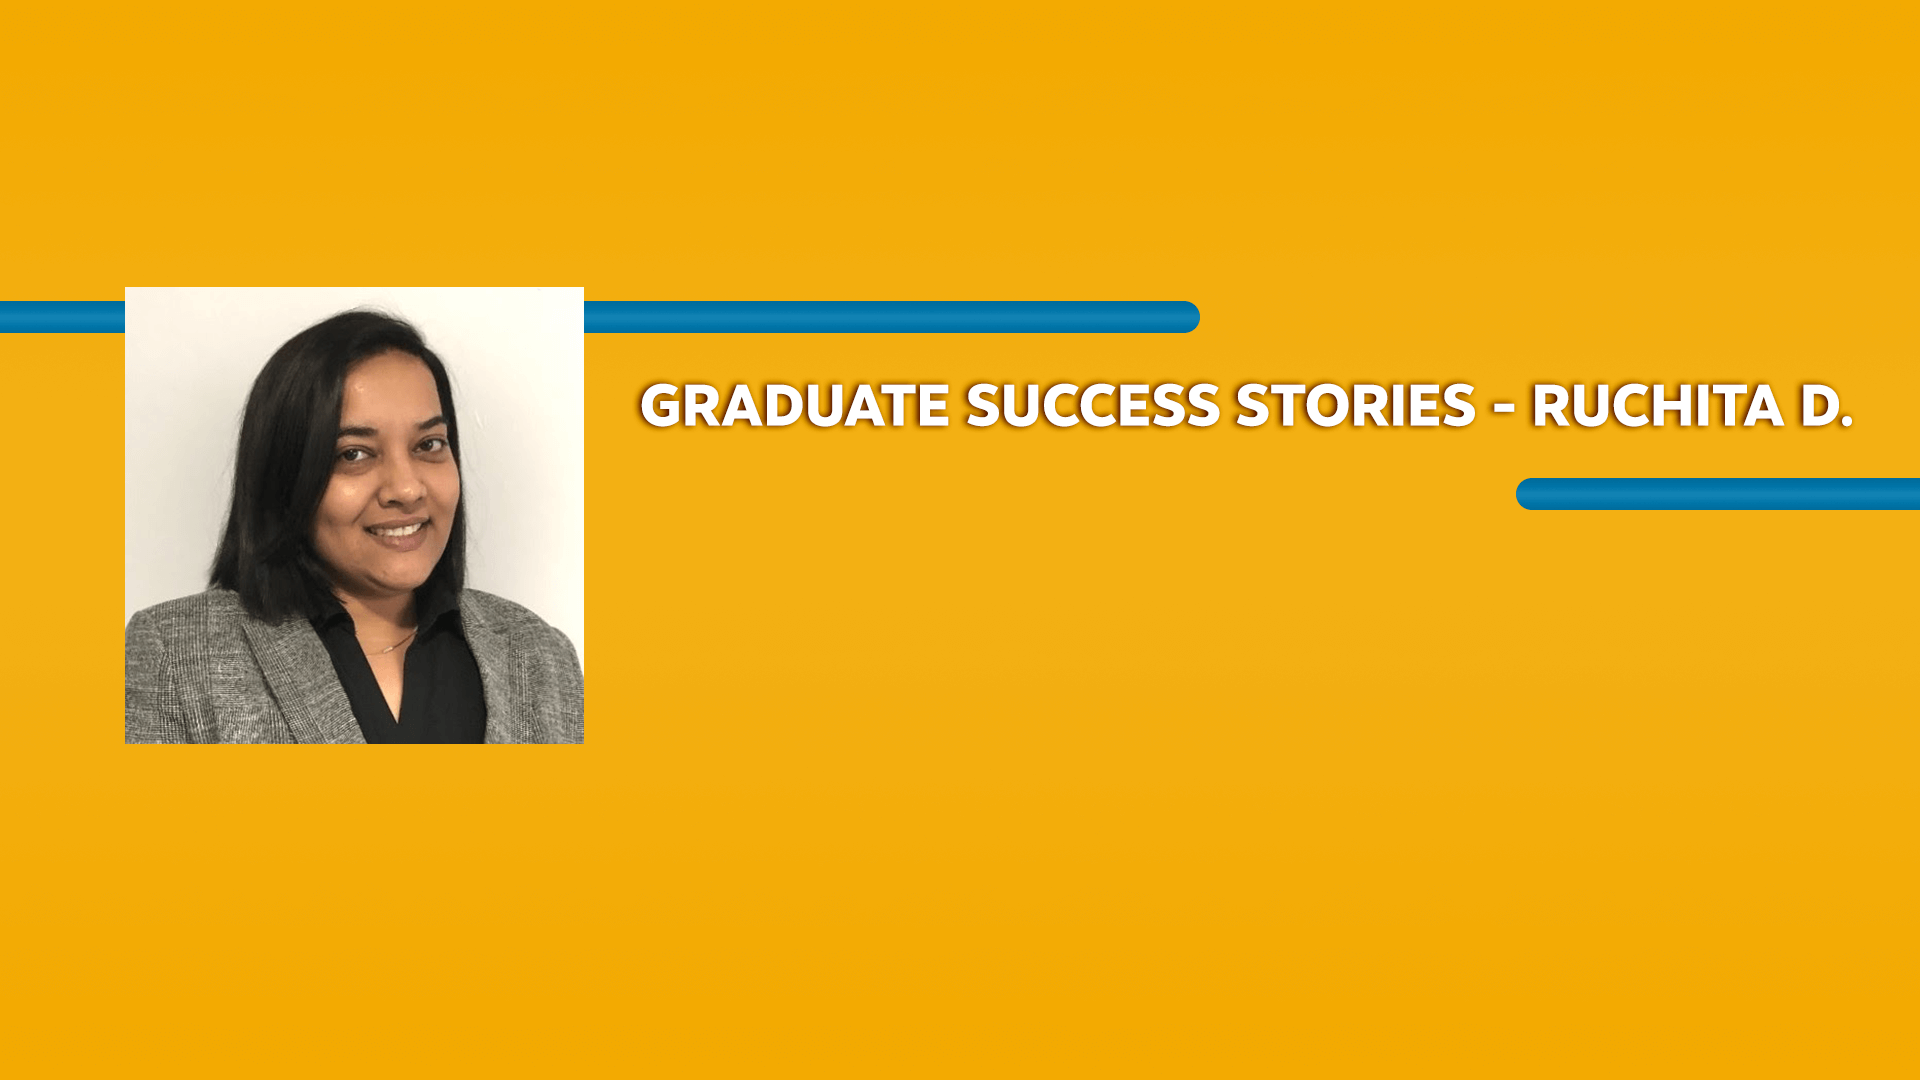 Orange rectangle with a picture of a woman wearing a blazer and Graduate Success Stories - Ruchita D. text in white font